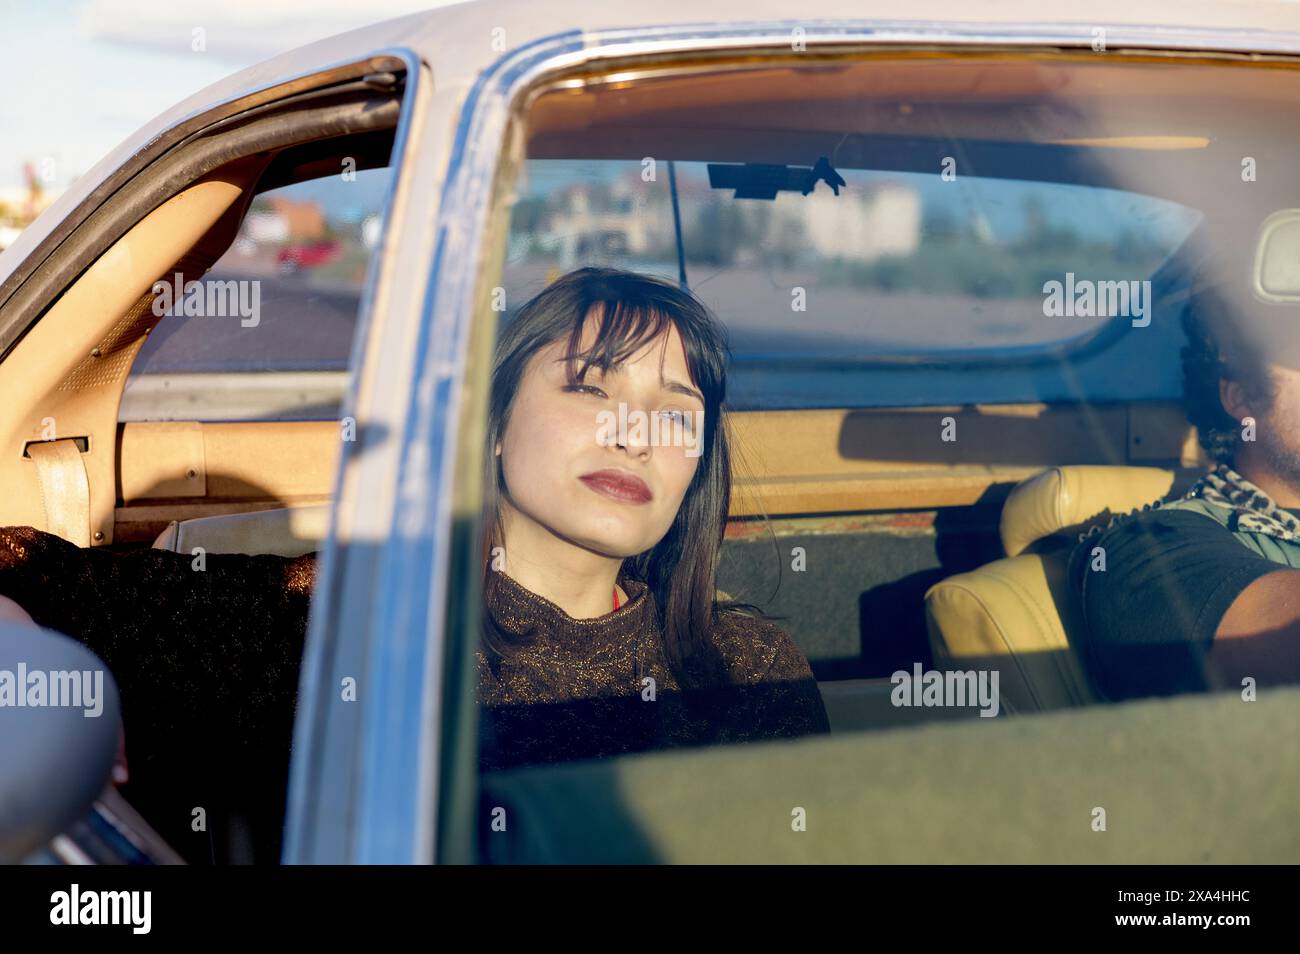 A woman with dark hair is seated in the front passenger seat of a vintage car, gazing out of the window with a thoughtful expression as the driver is partially visible with focus on the woman. Stock Photo